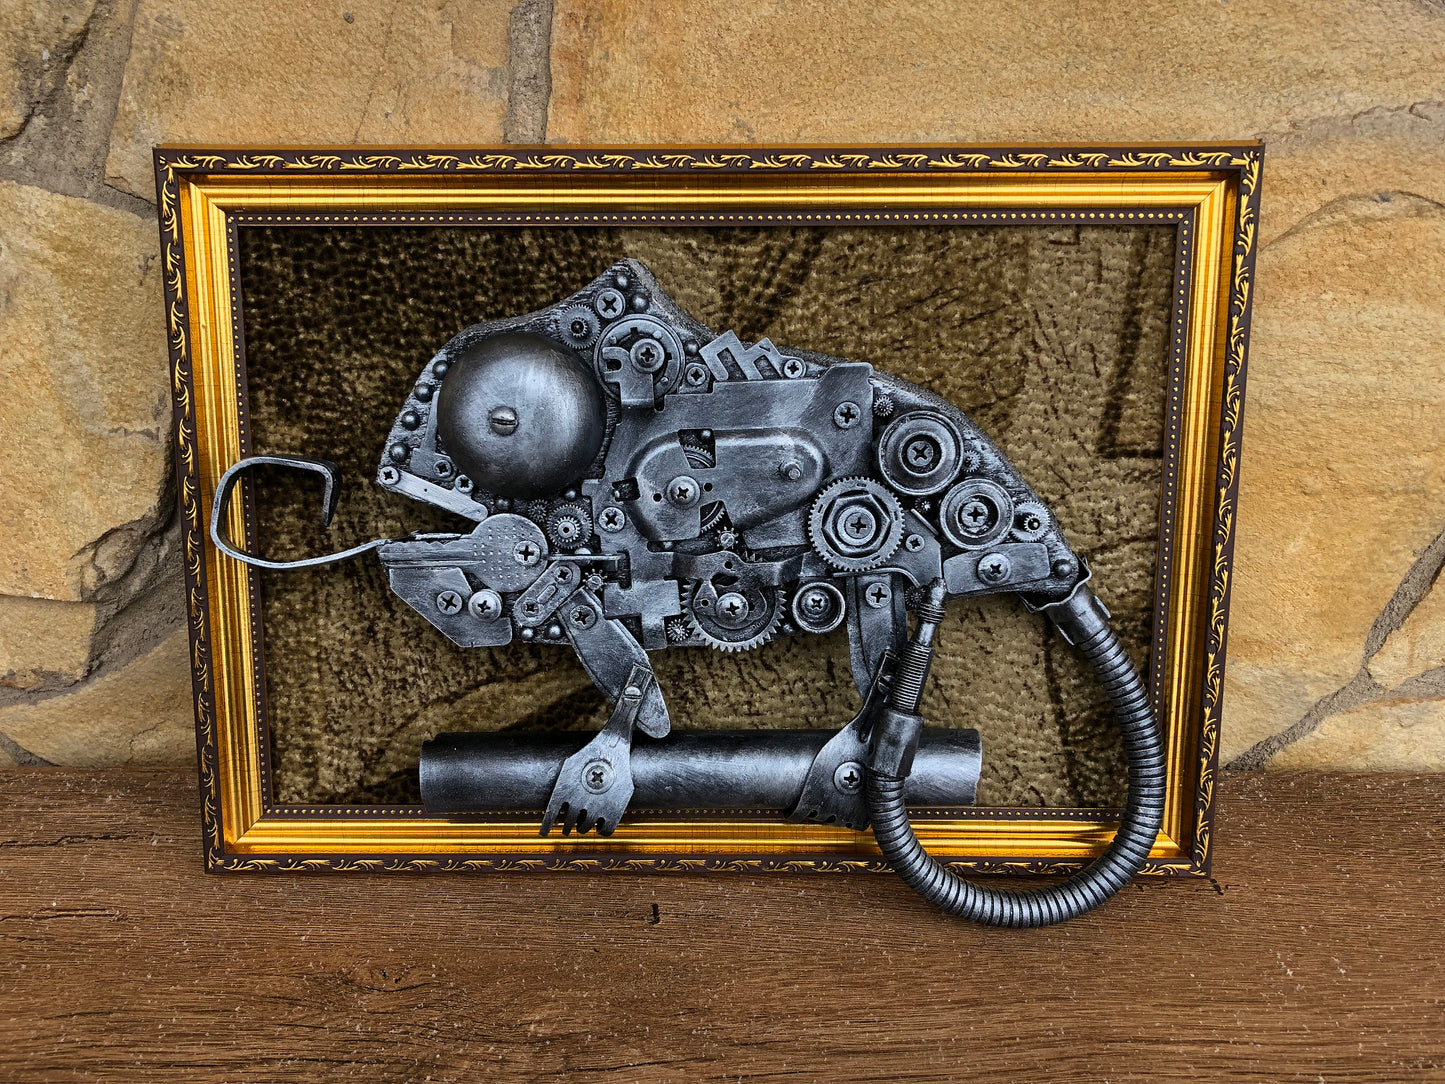 Steampunk painting, steampunk chameleon, steampunk poster, metalic ornament, gears, wall decor, steampunk room decor, junk art,steampunk art